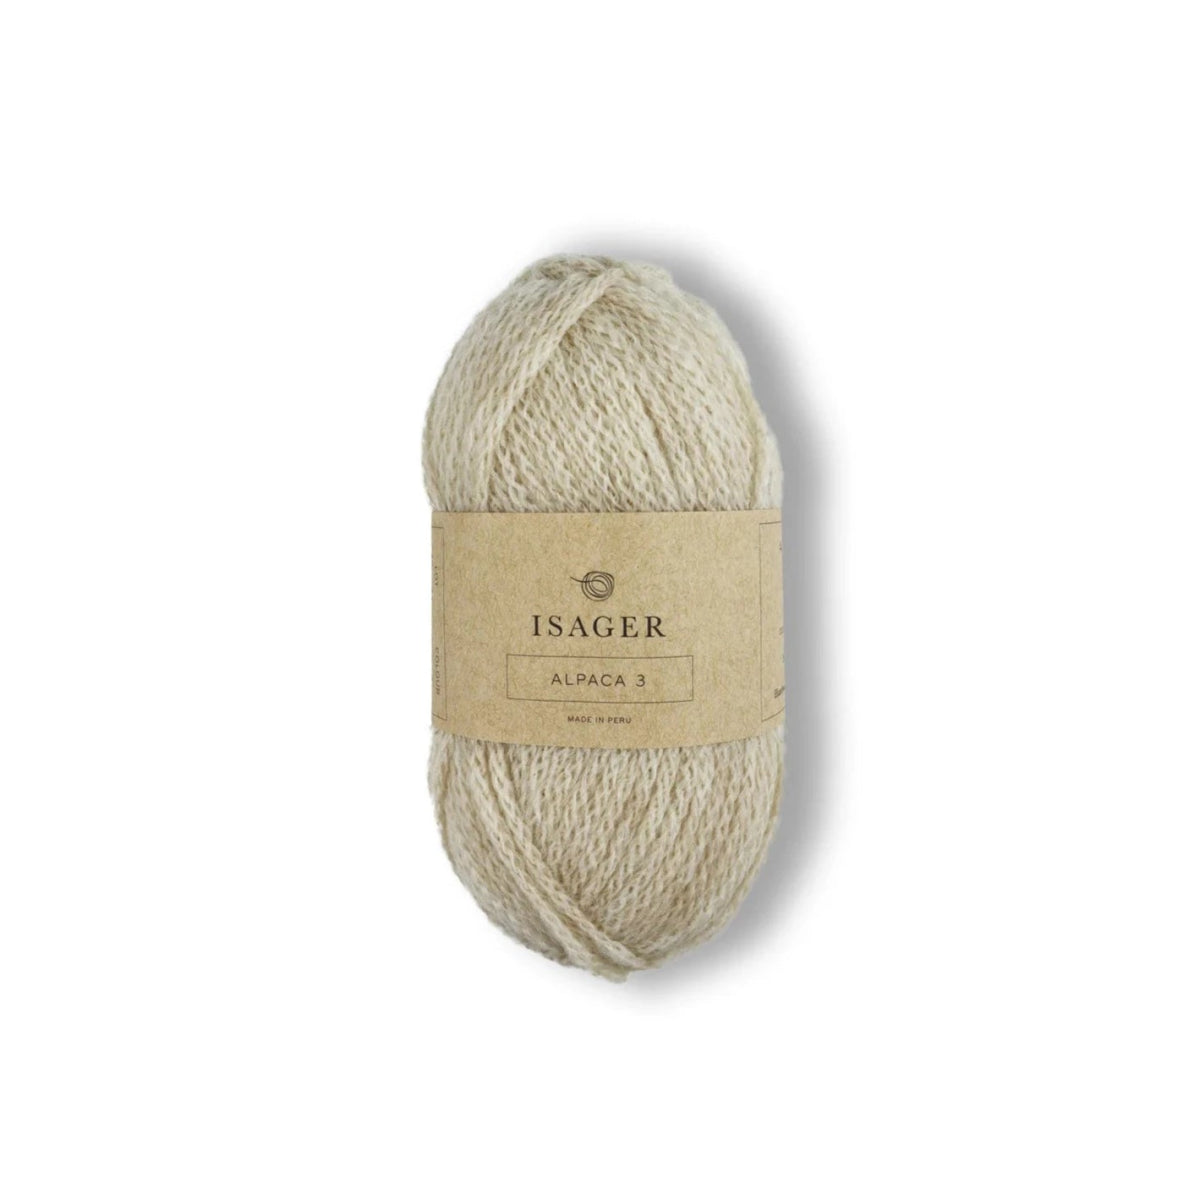 Isager Alpaca 3 - 6s Eco - 8 Ply - Alpaca - The Little Yarn Store